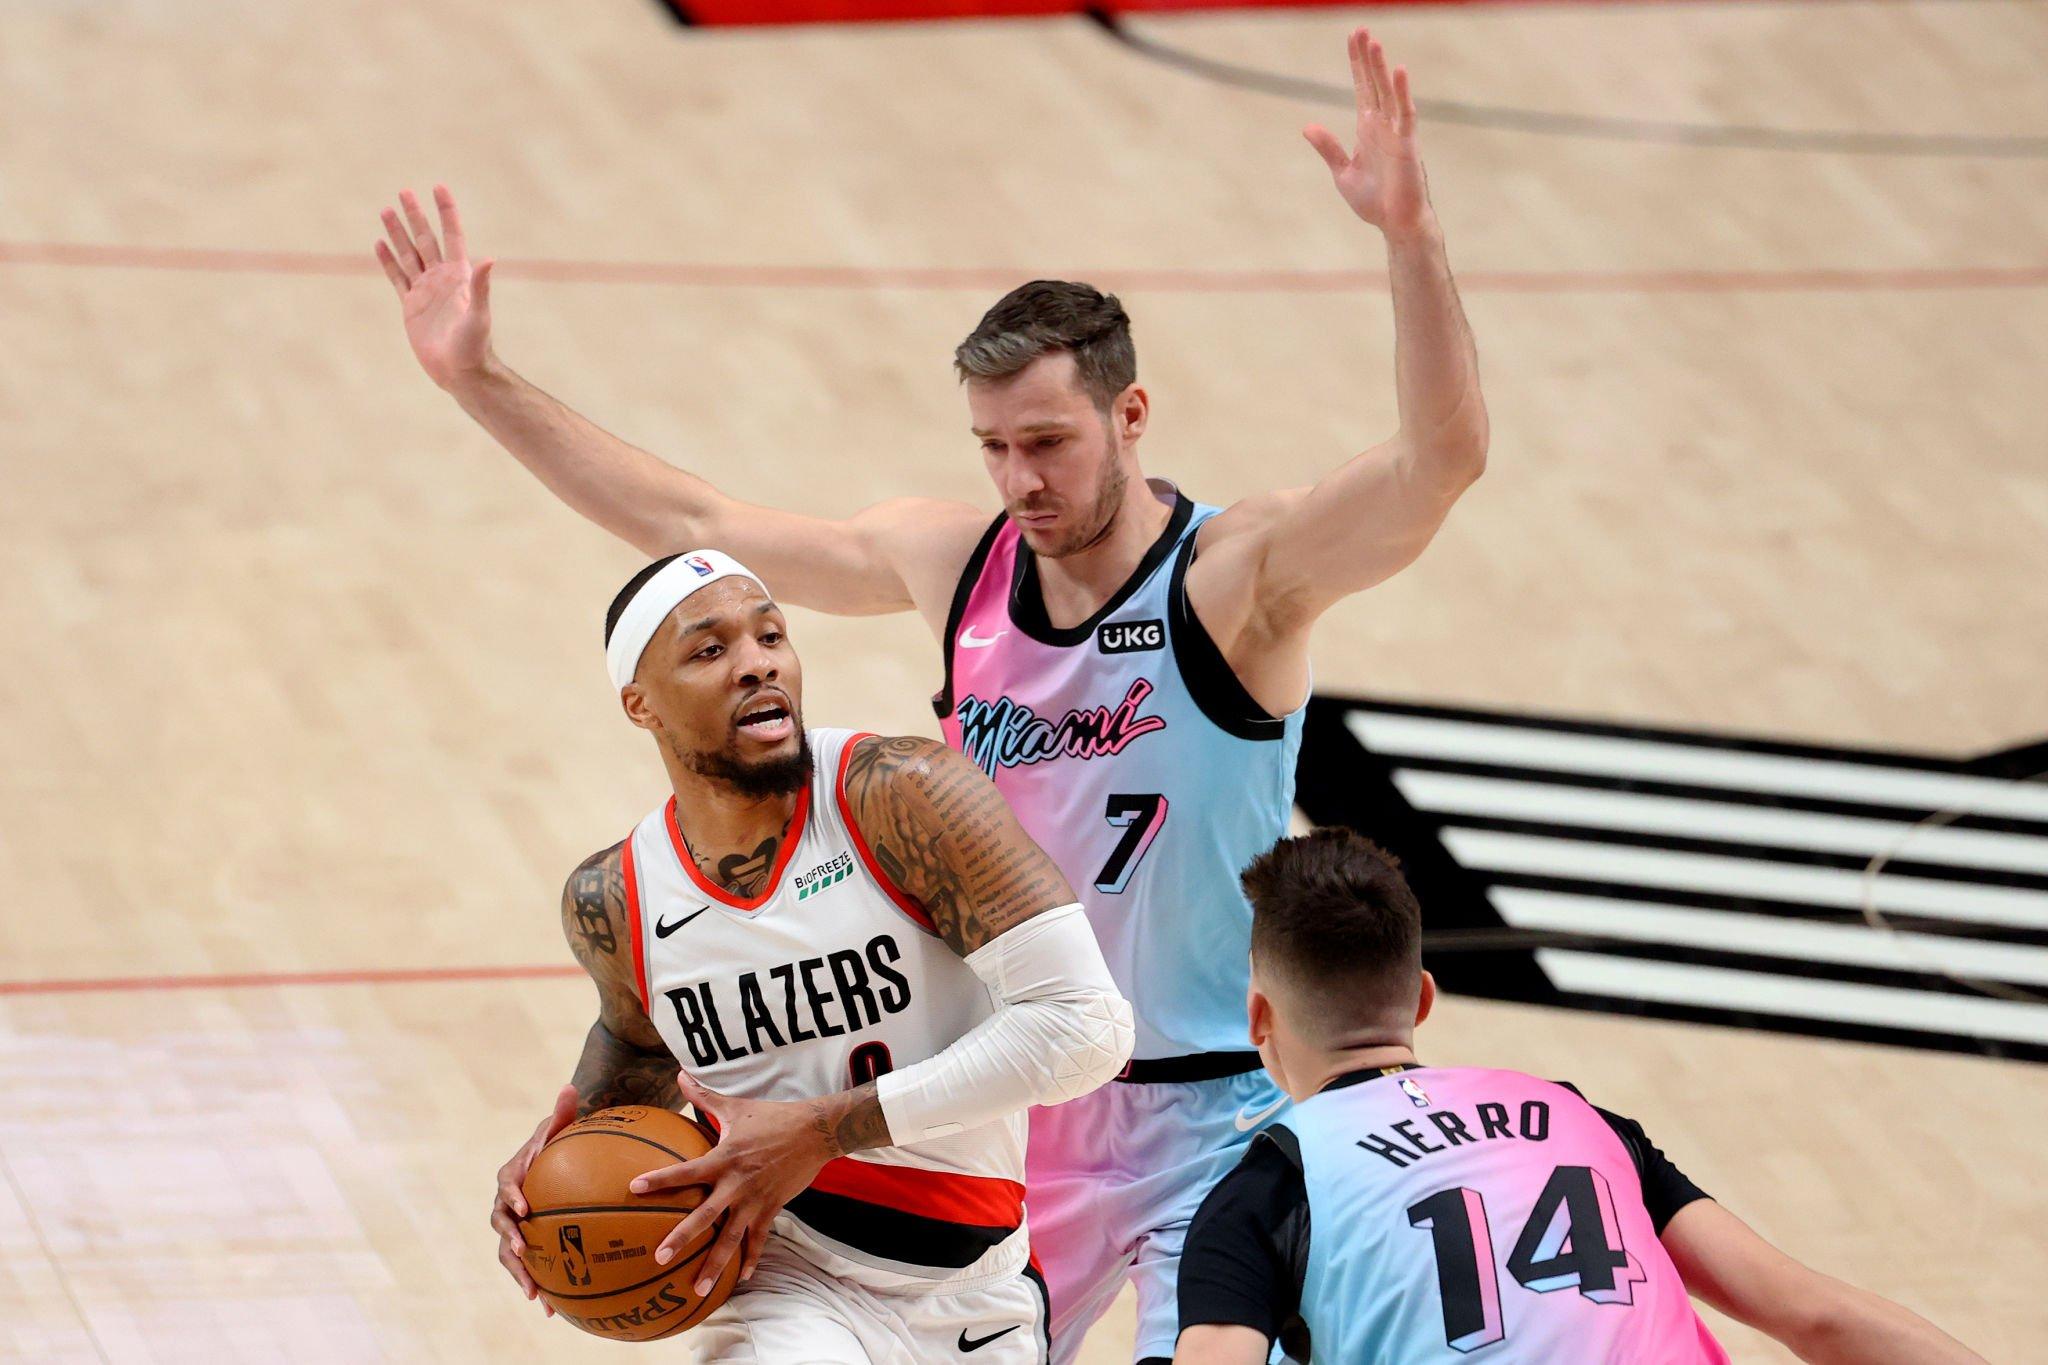 PORTLAND, OREGON - APRIL 11: Damian Lillard #0 of the Portland Trail Blazers works towards the basket against Goran Dragic #7 and Tyler Herro #14 of the Miami Heat in the third quarter at Moda Center on April 11, 2021 in Portland, Oregon. NOTE TO USER: User expressly acknowledges and agrees that, by downloading and or using this photograph, User is consenting to the terms and conditions of the Getty Images License Agreement. (Photo by Abbie Parr/Getty Images)